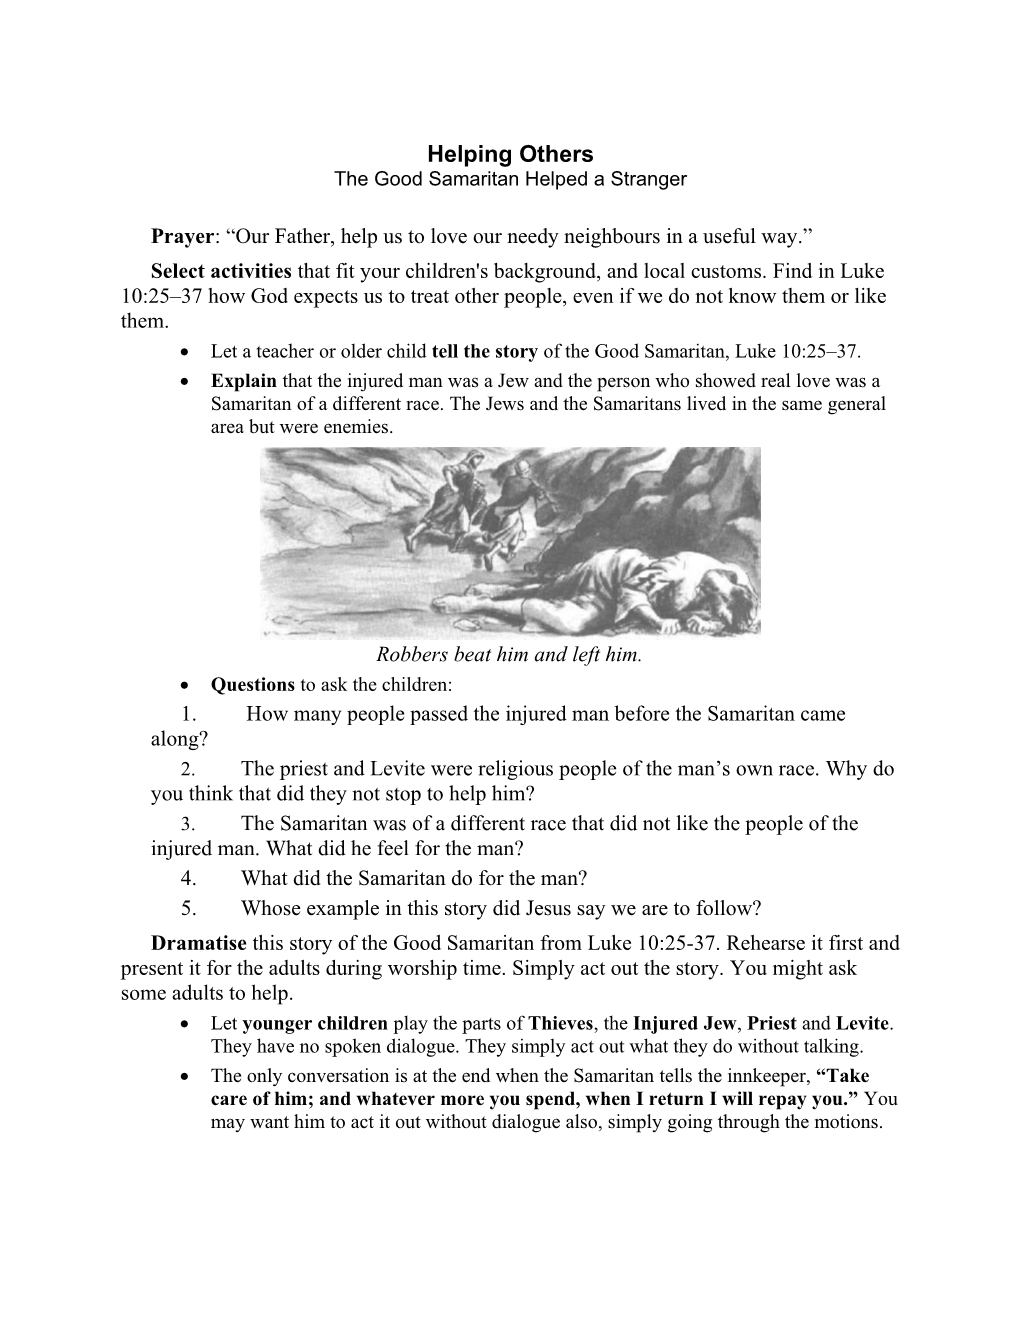 Paul-Timothy Children's Study Love, #73 Page 2 of 2